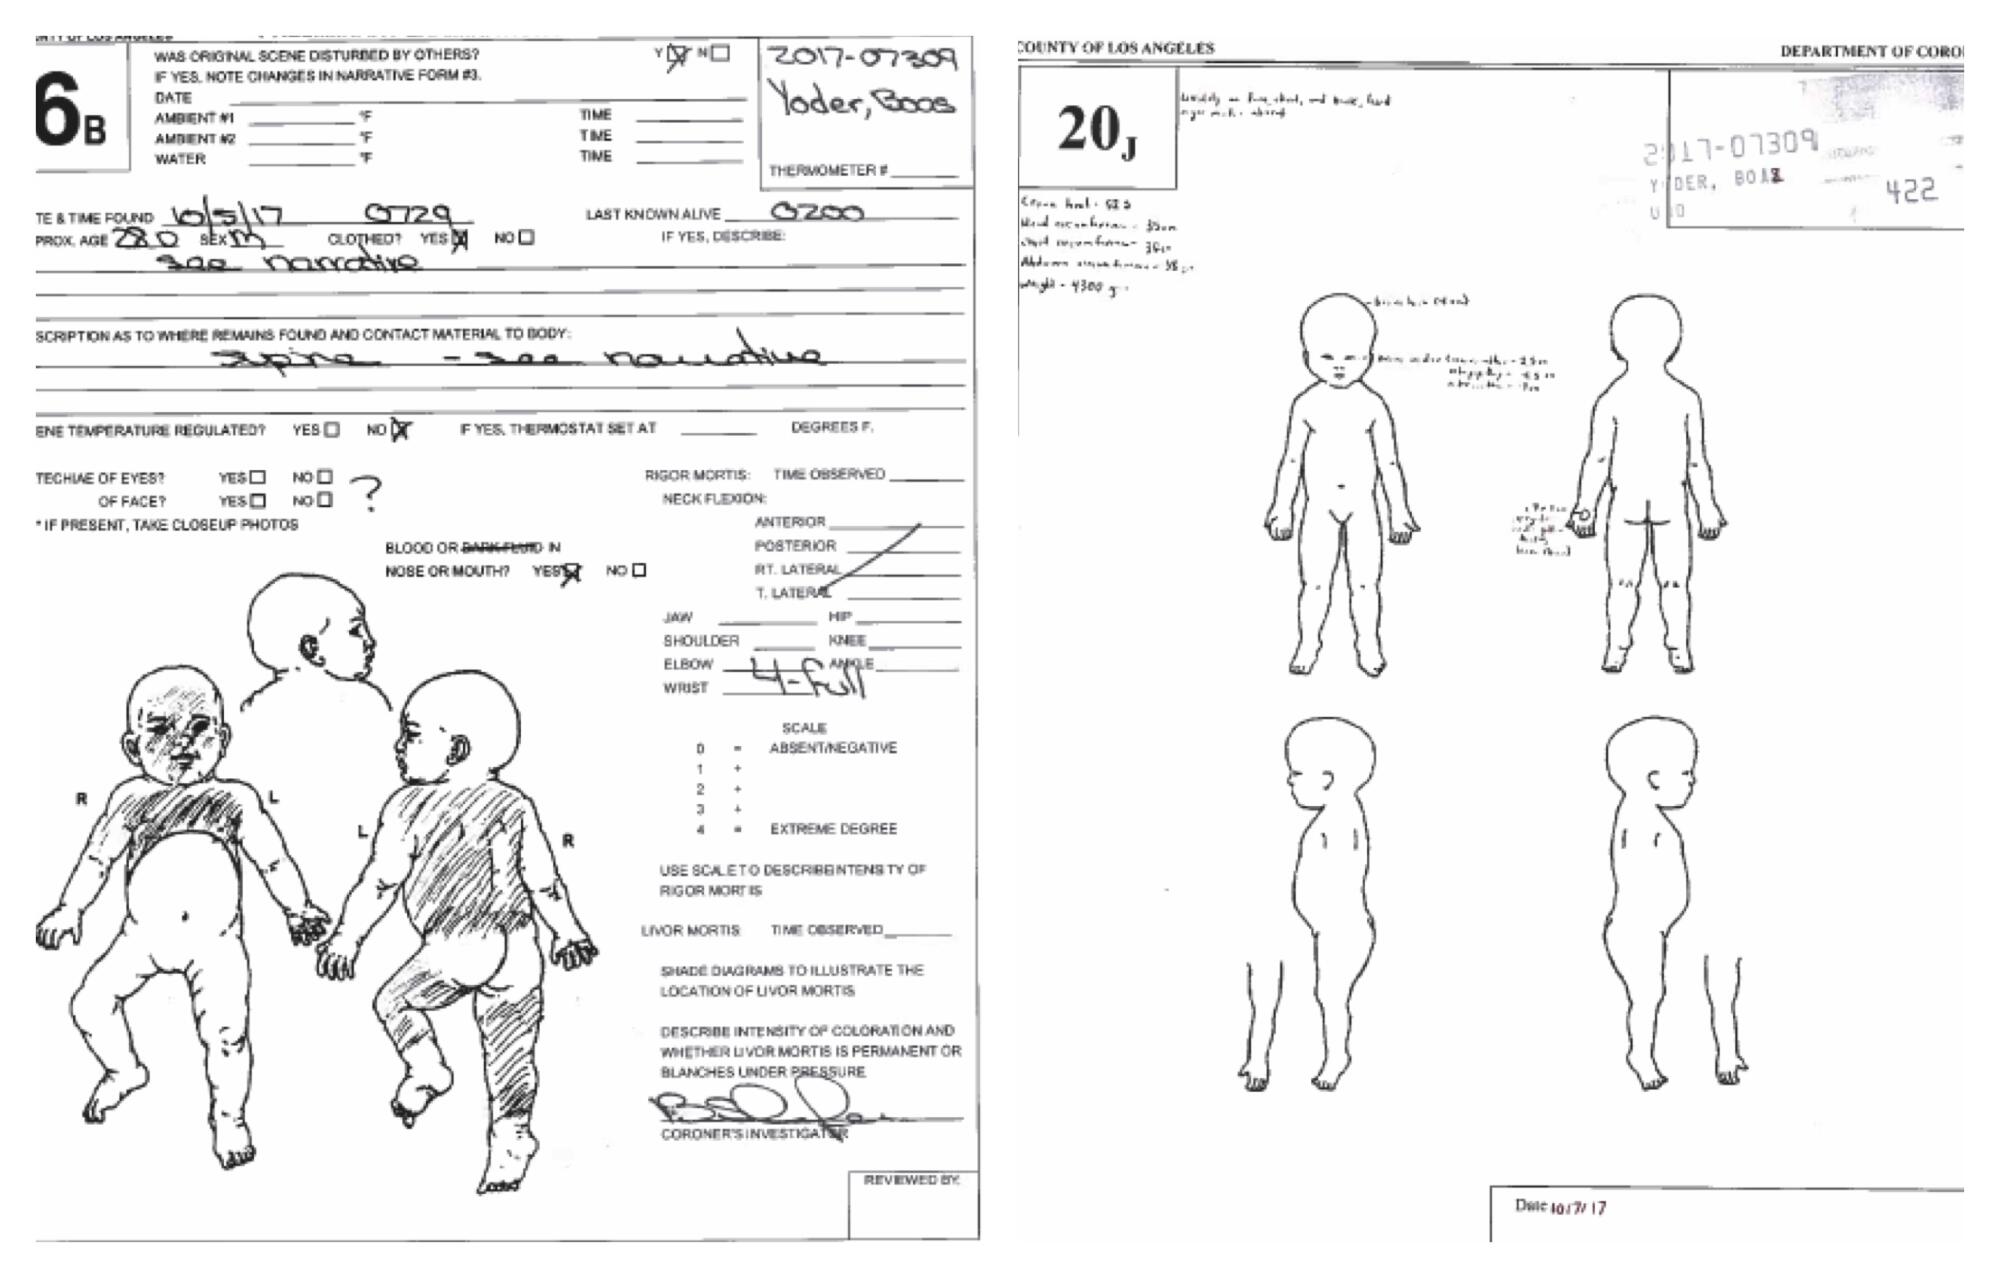 Two documents with drawings of a baby's body.